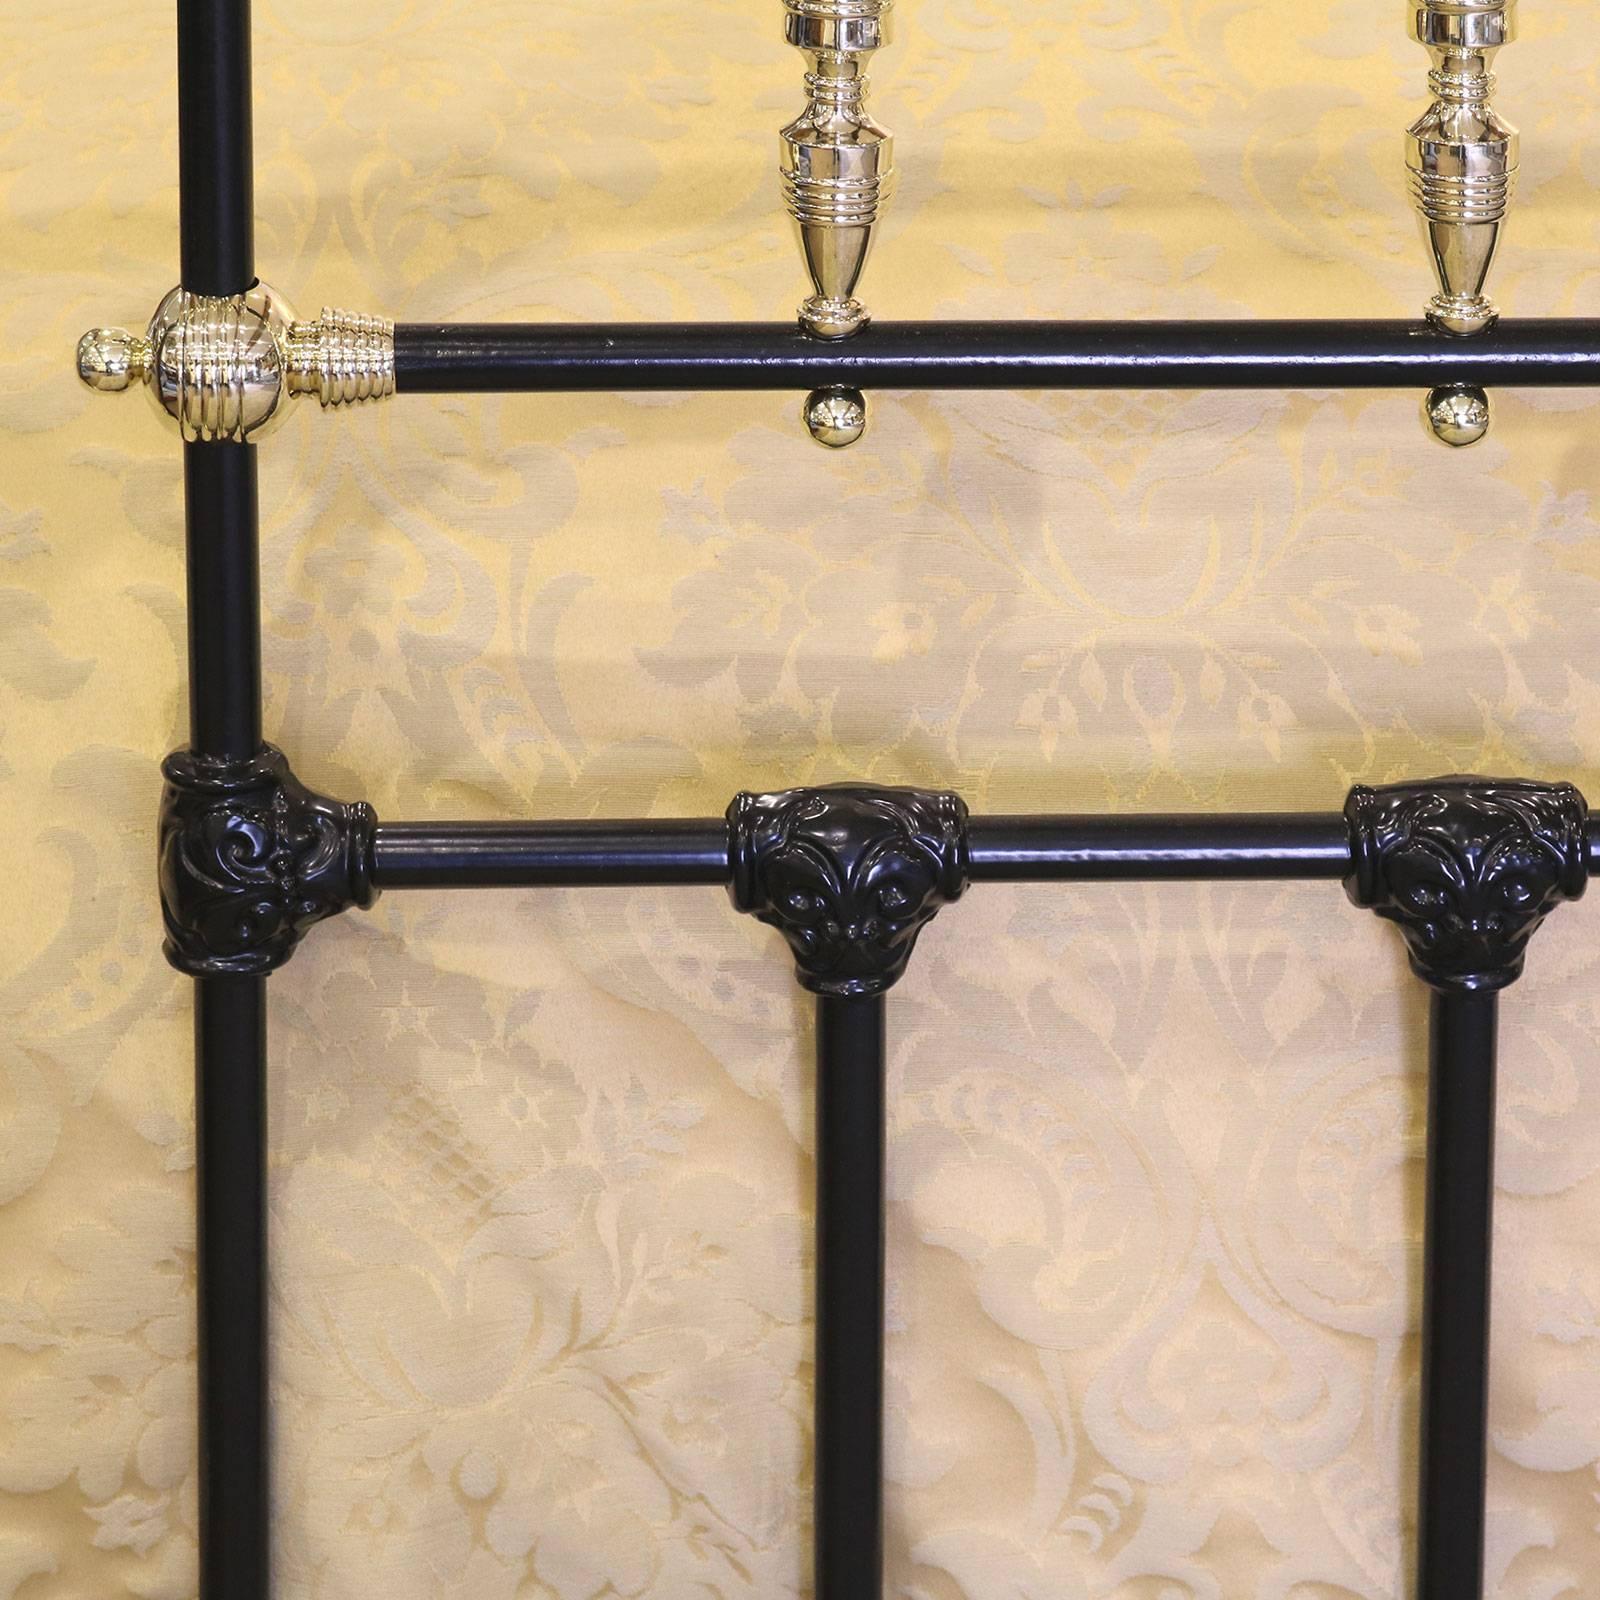 Brass and Iron Decorative Bed in Black MK99 2